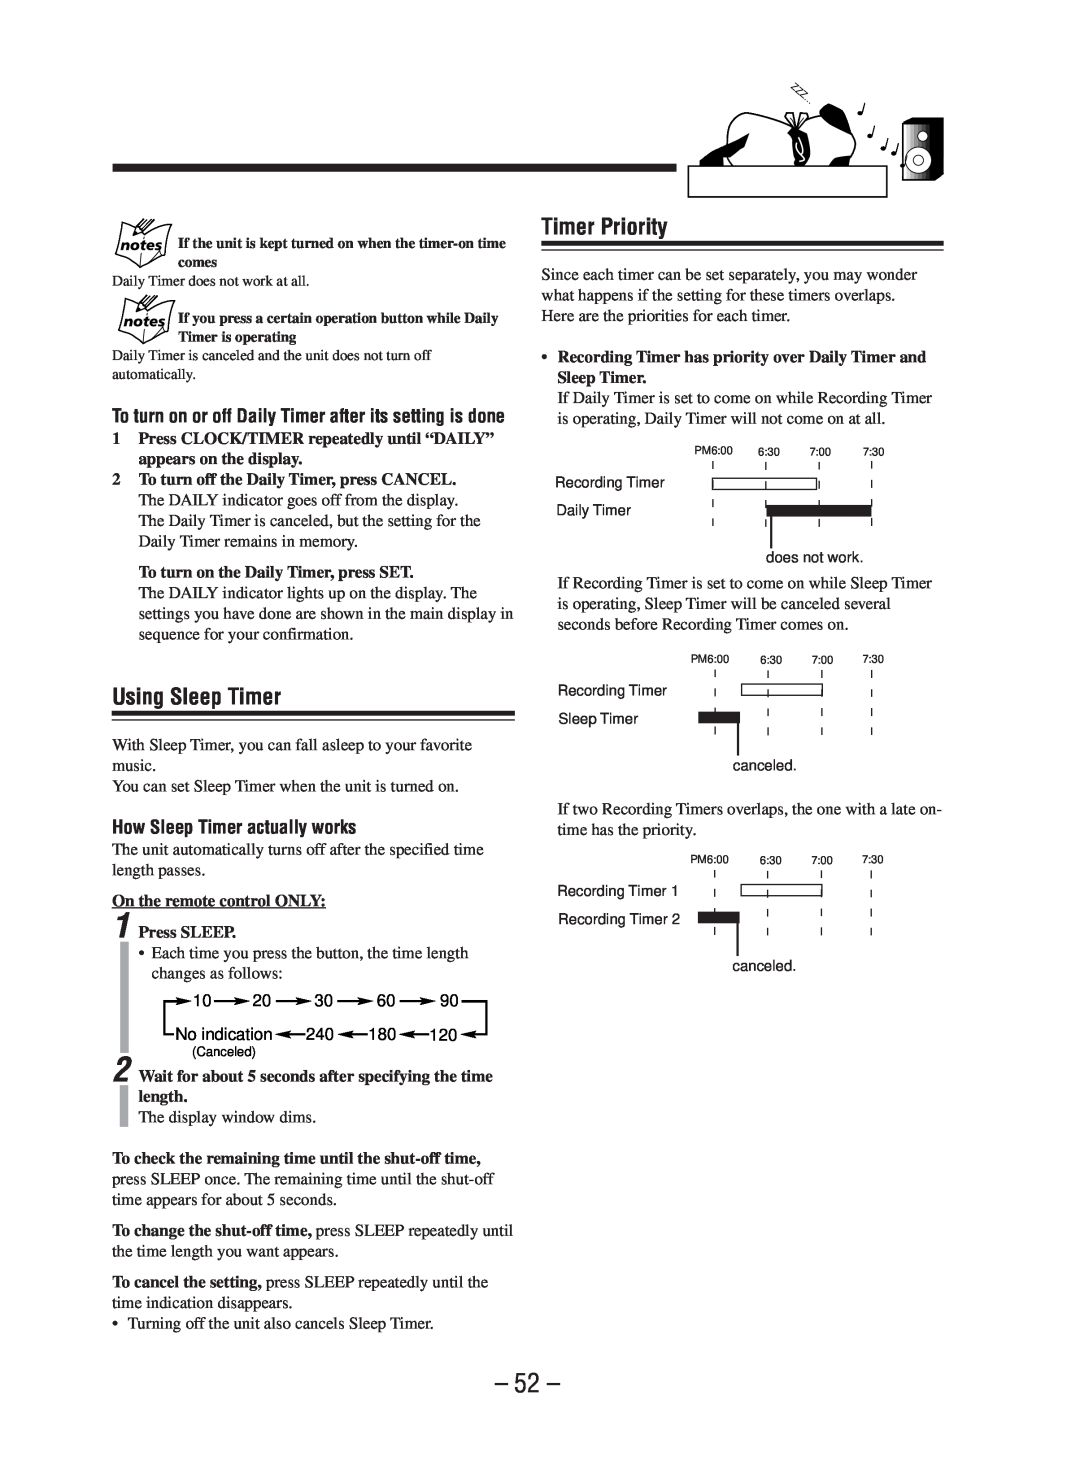 JVC CA-WMD90R manual Timer Priority, Using Sleep Timer, How Sleep Timer actually works 